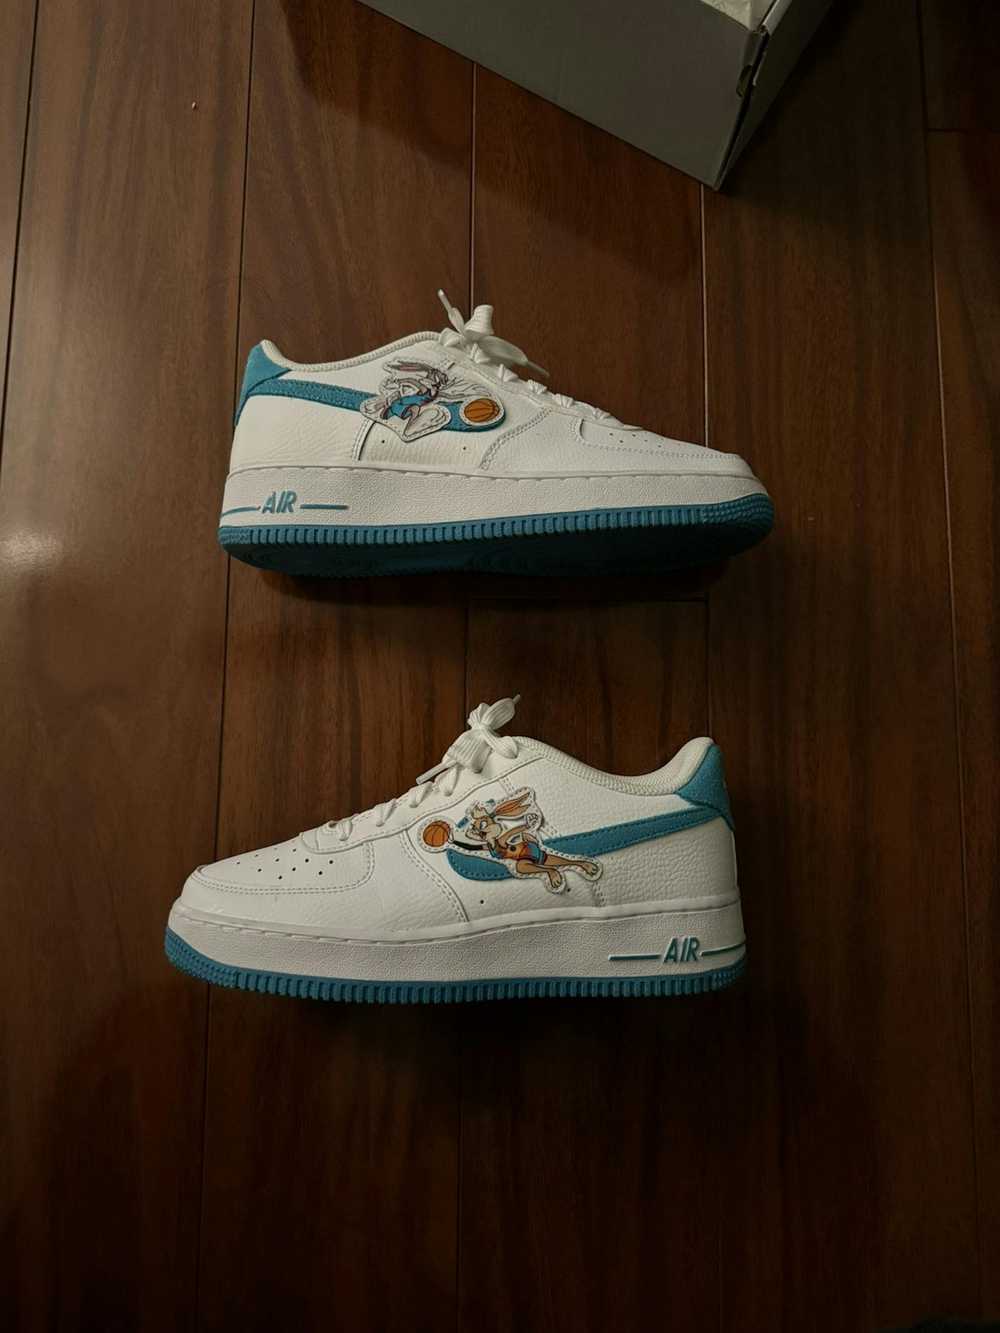 Nike Air Force 1 “Space Jam” GS - image 1